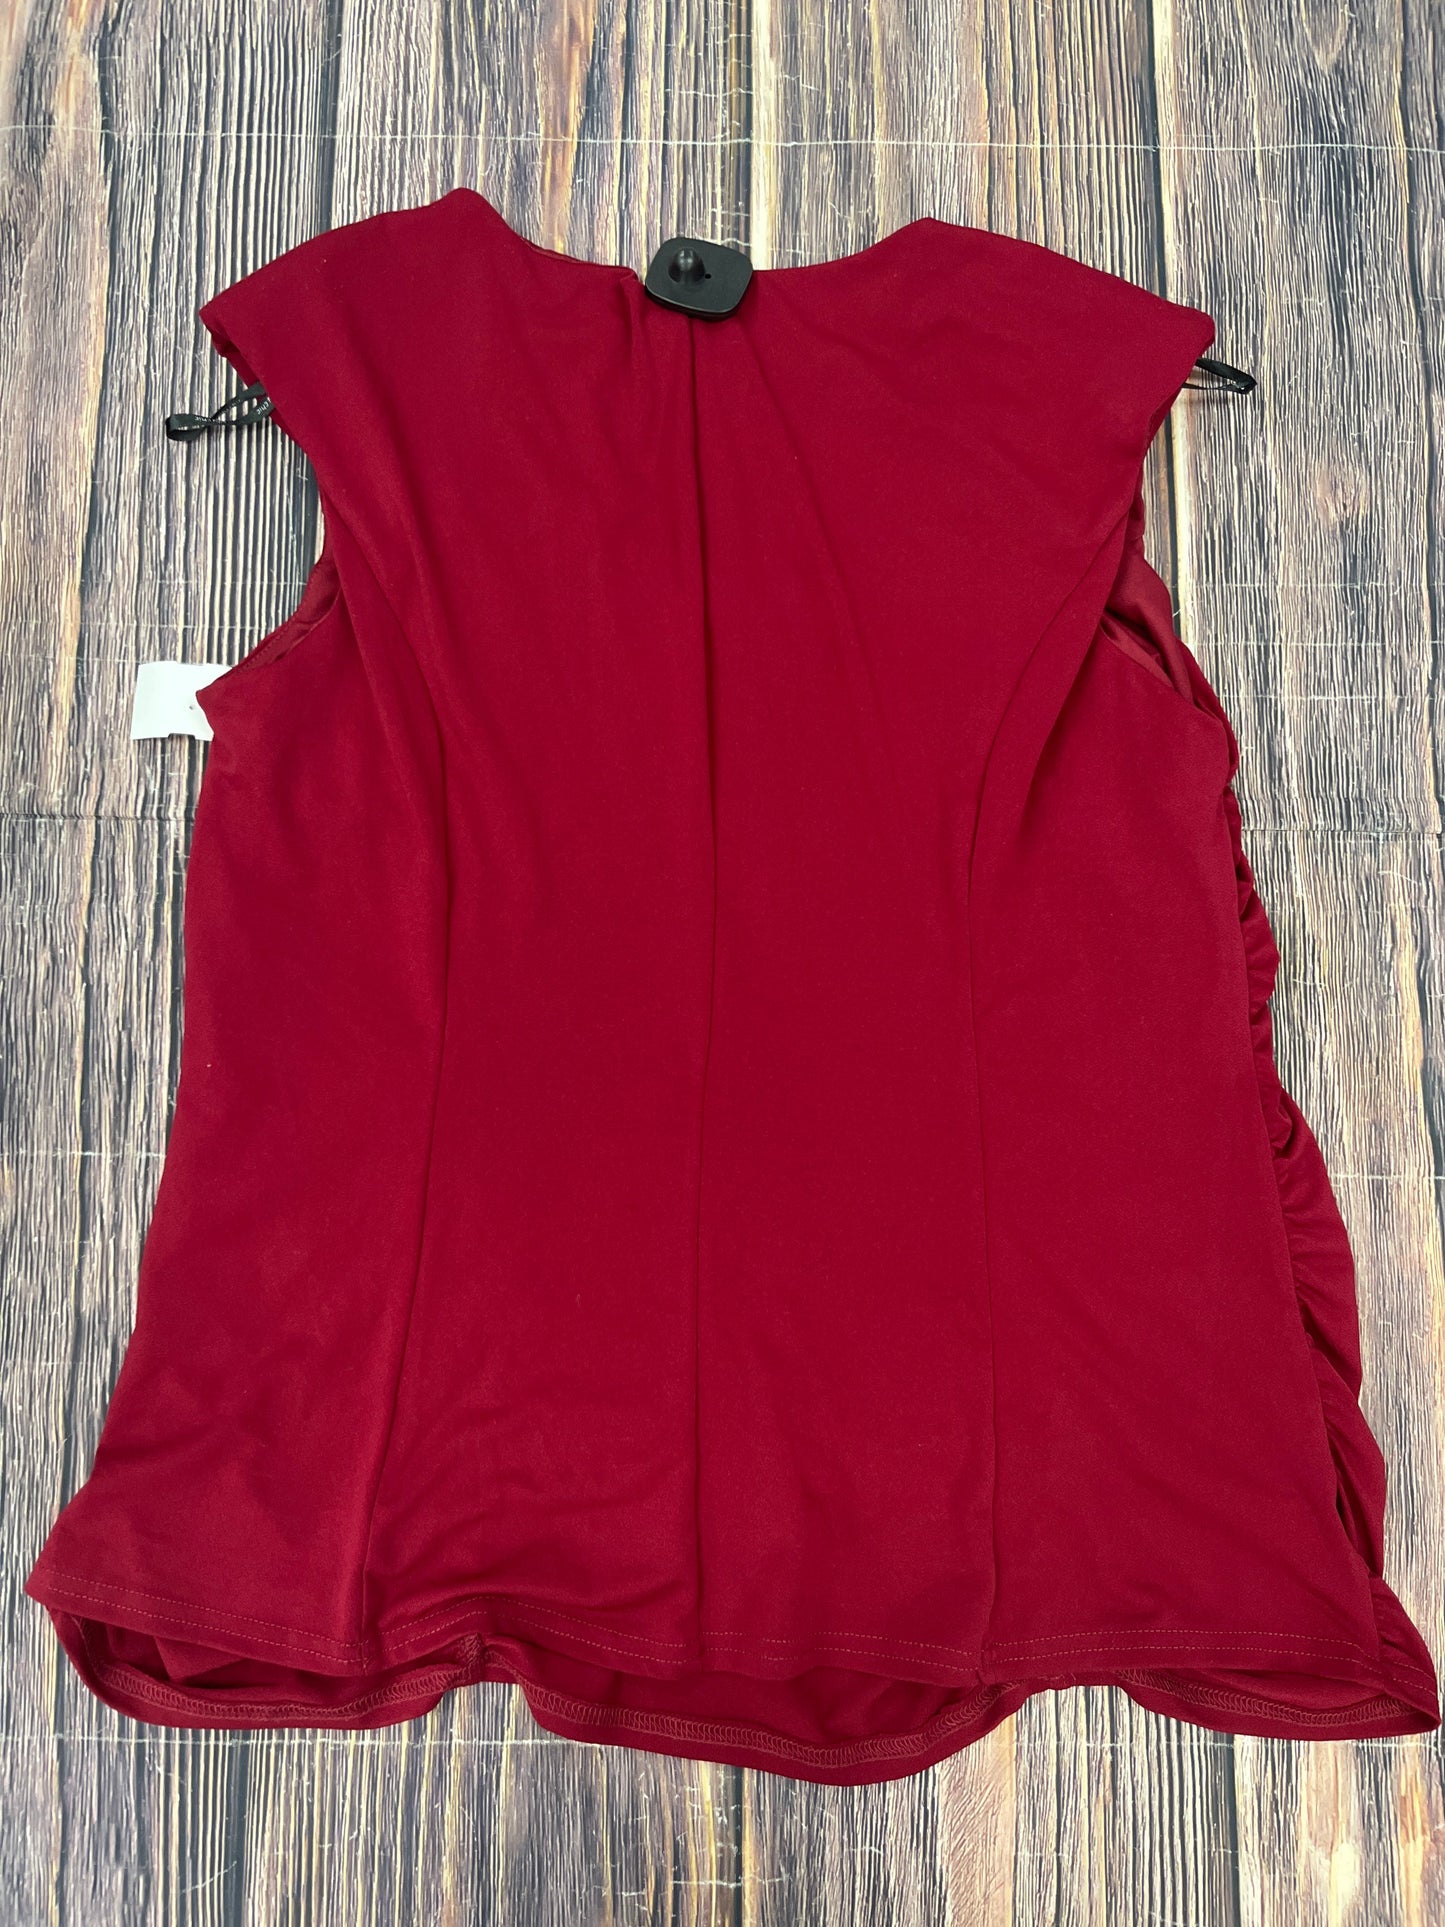 Top Sleeveless By City Chic  Size: 1x